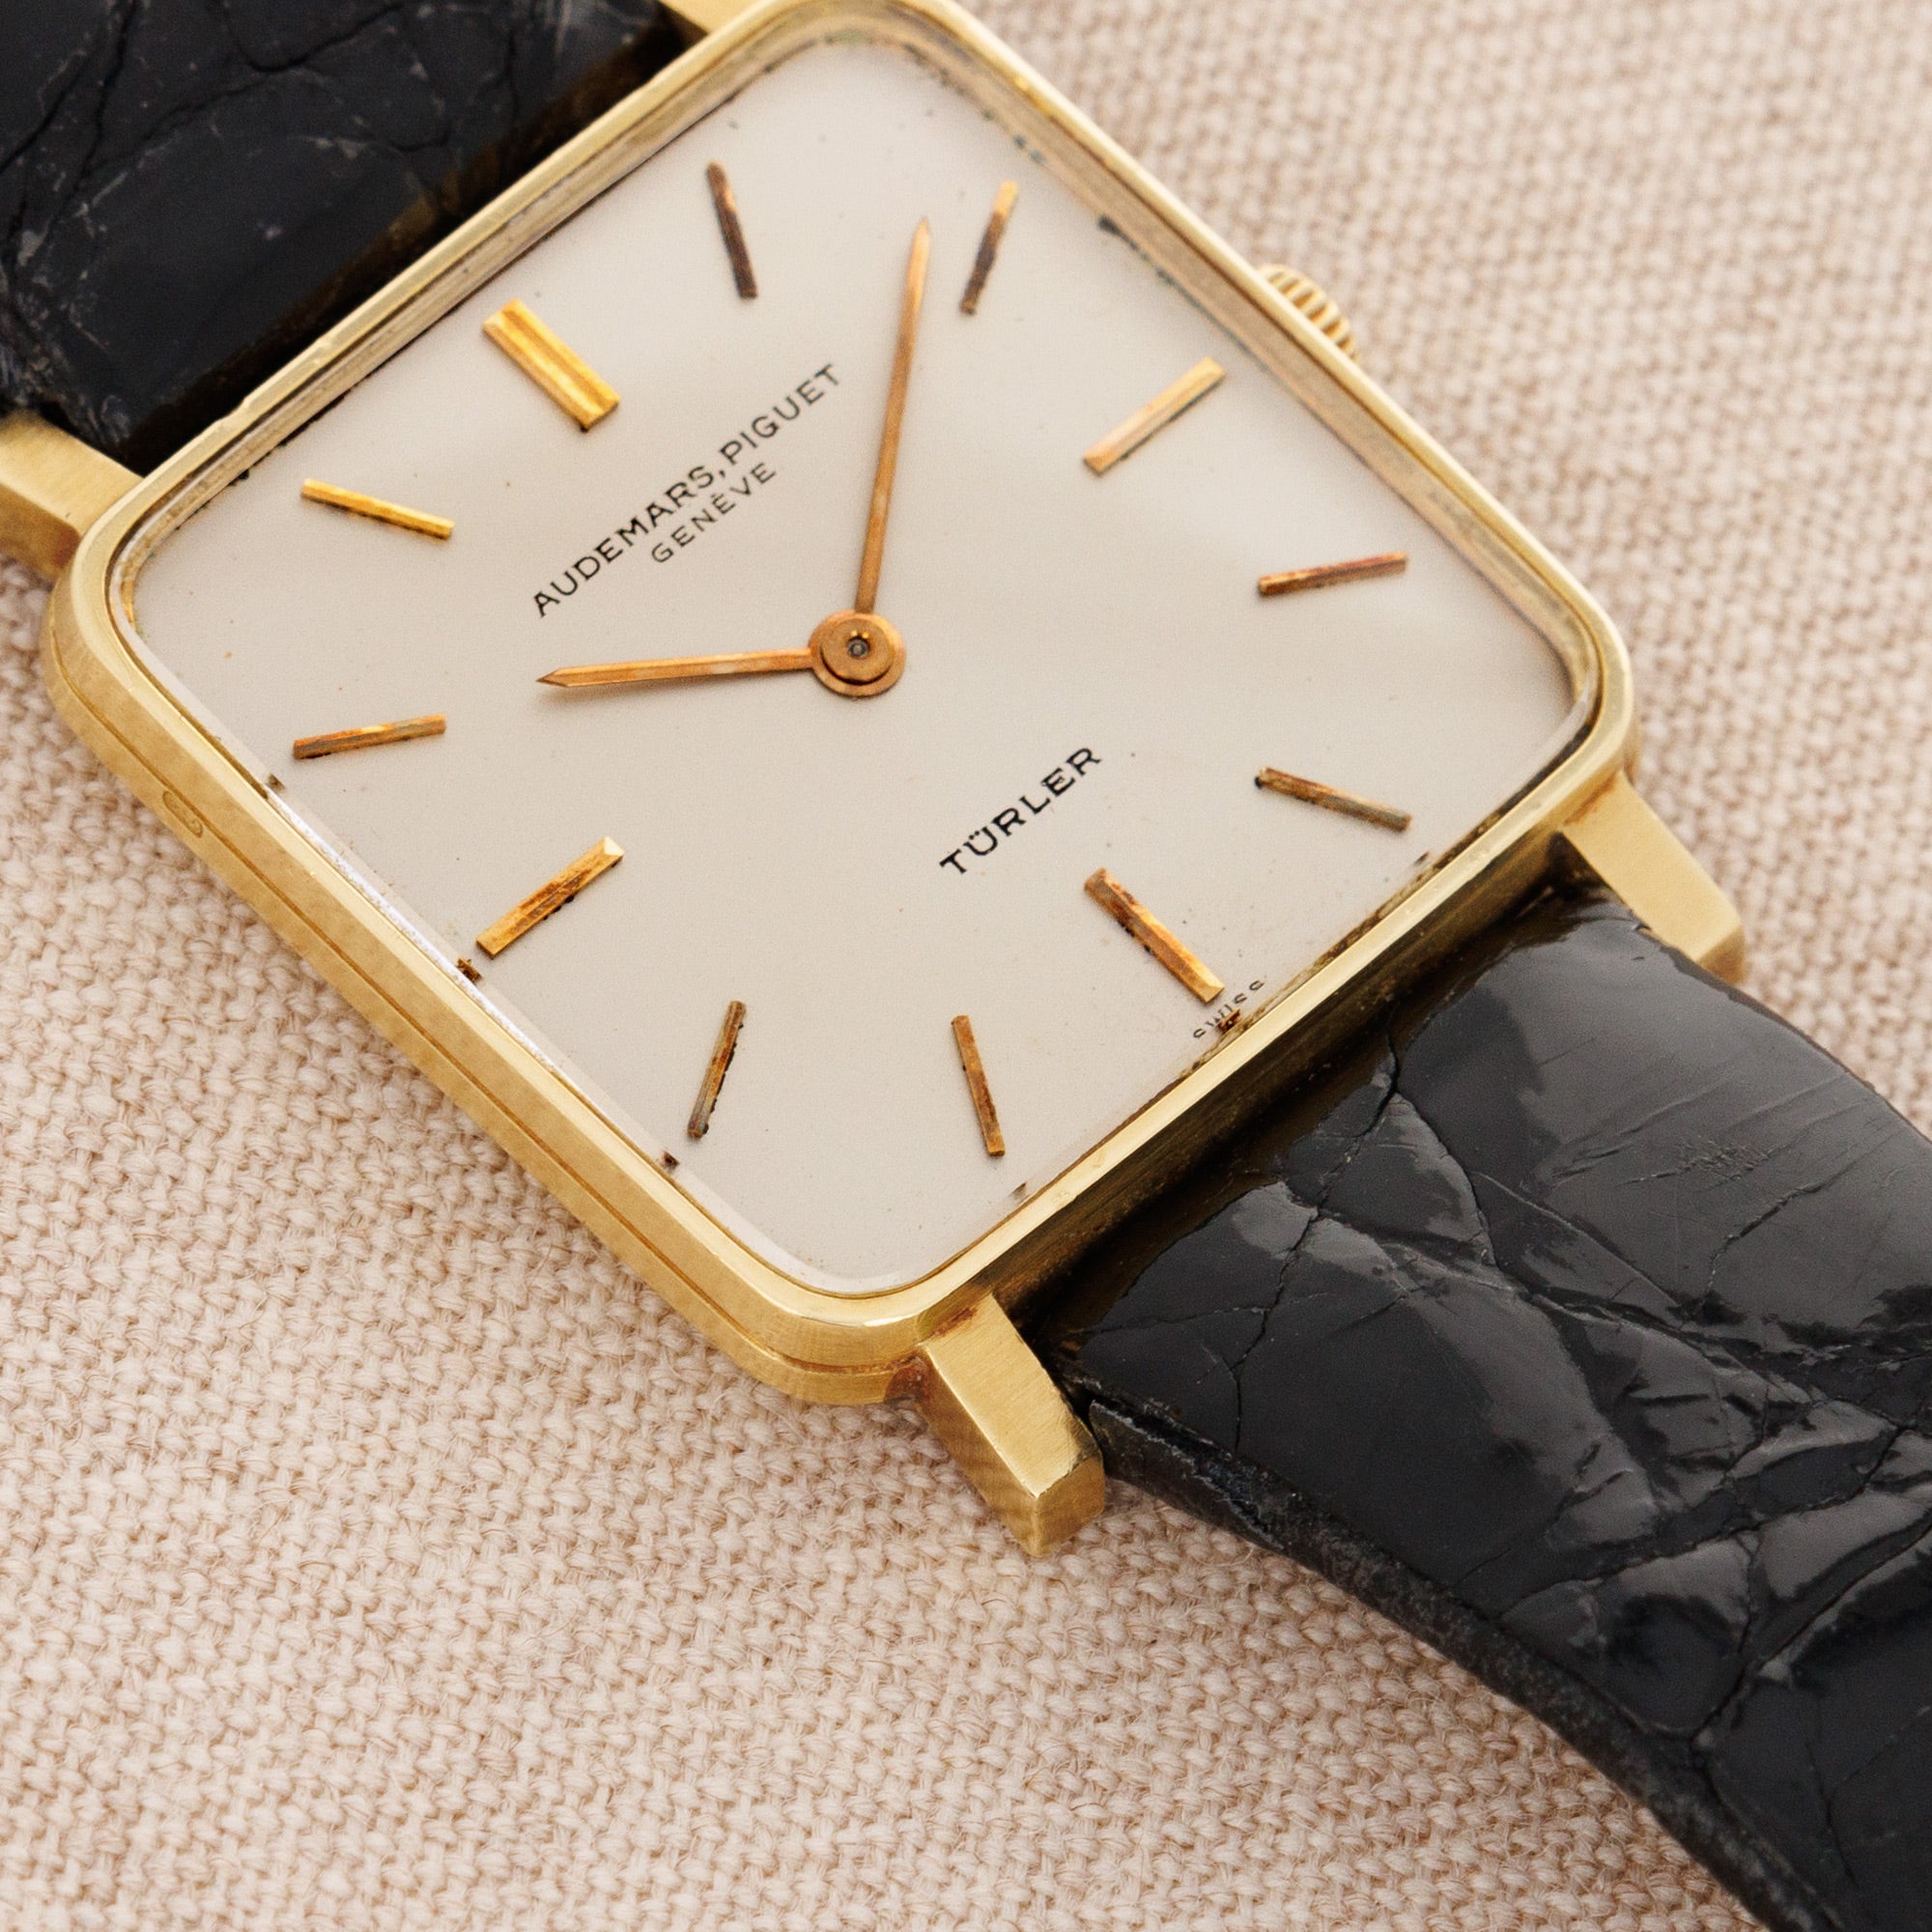 Audemars Piguet Yellow Gold Square Watch Retailed by Turler